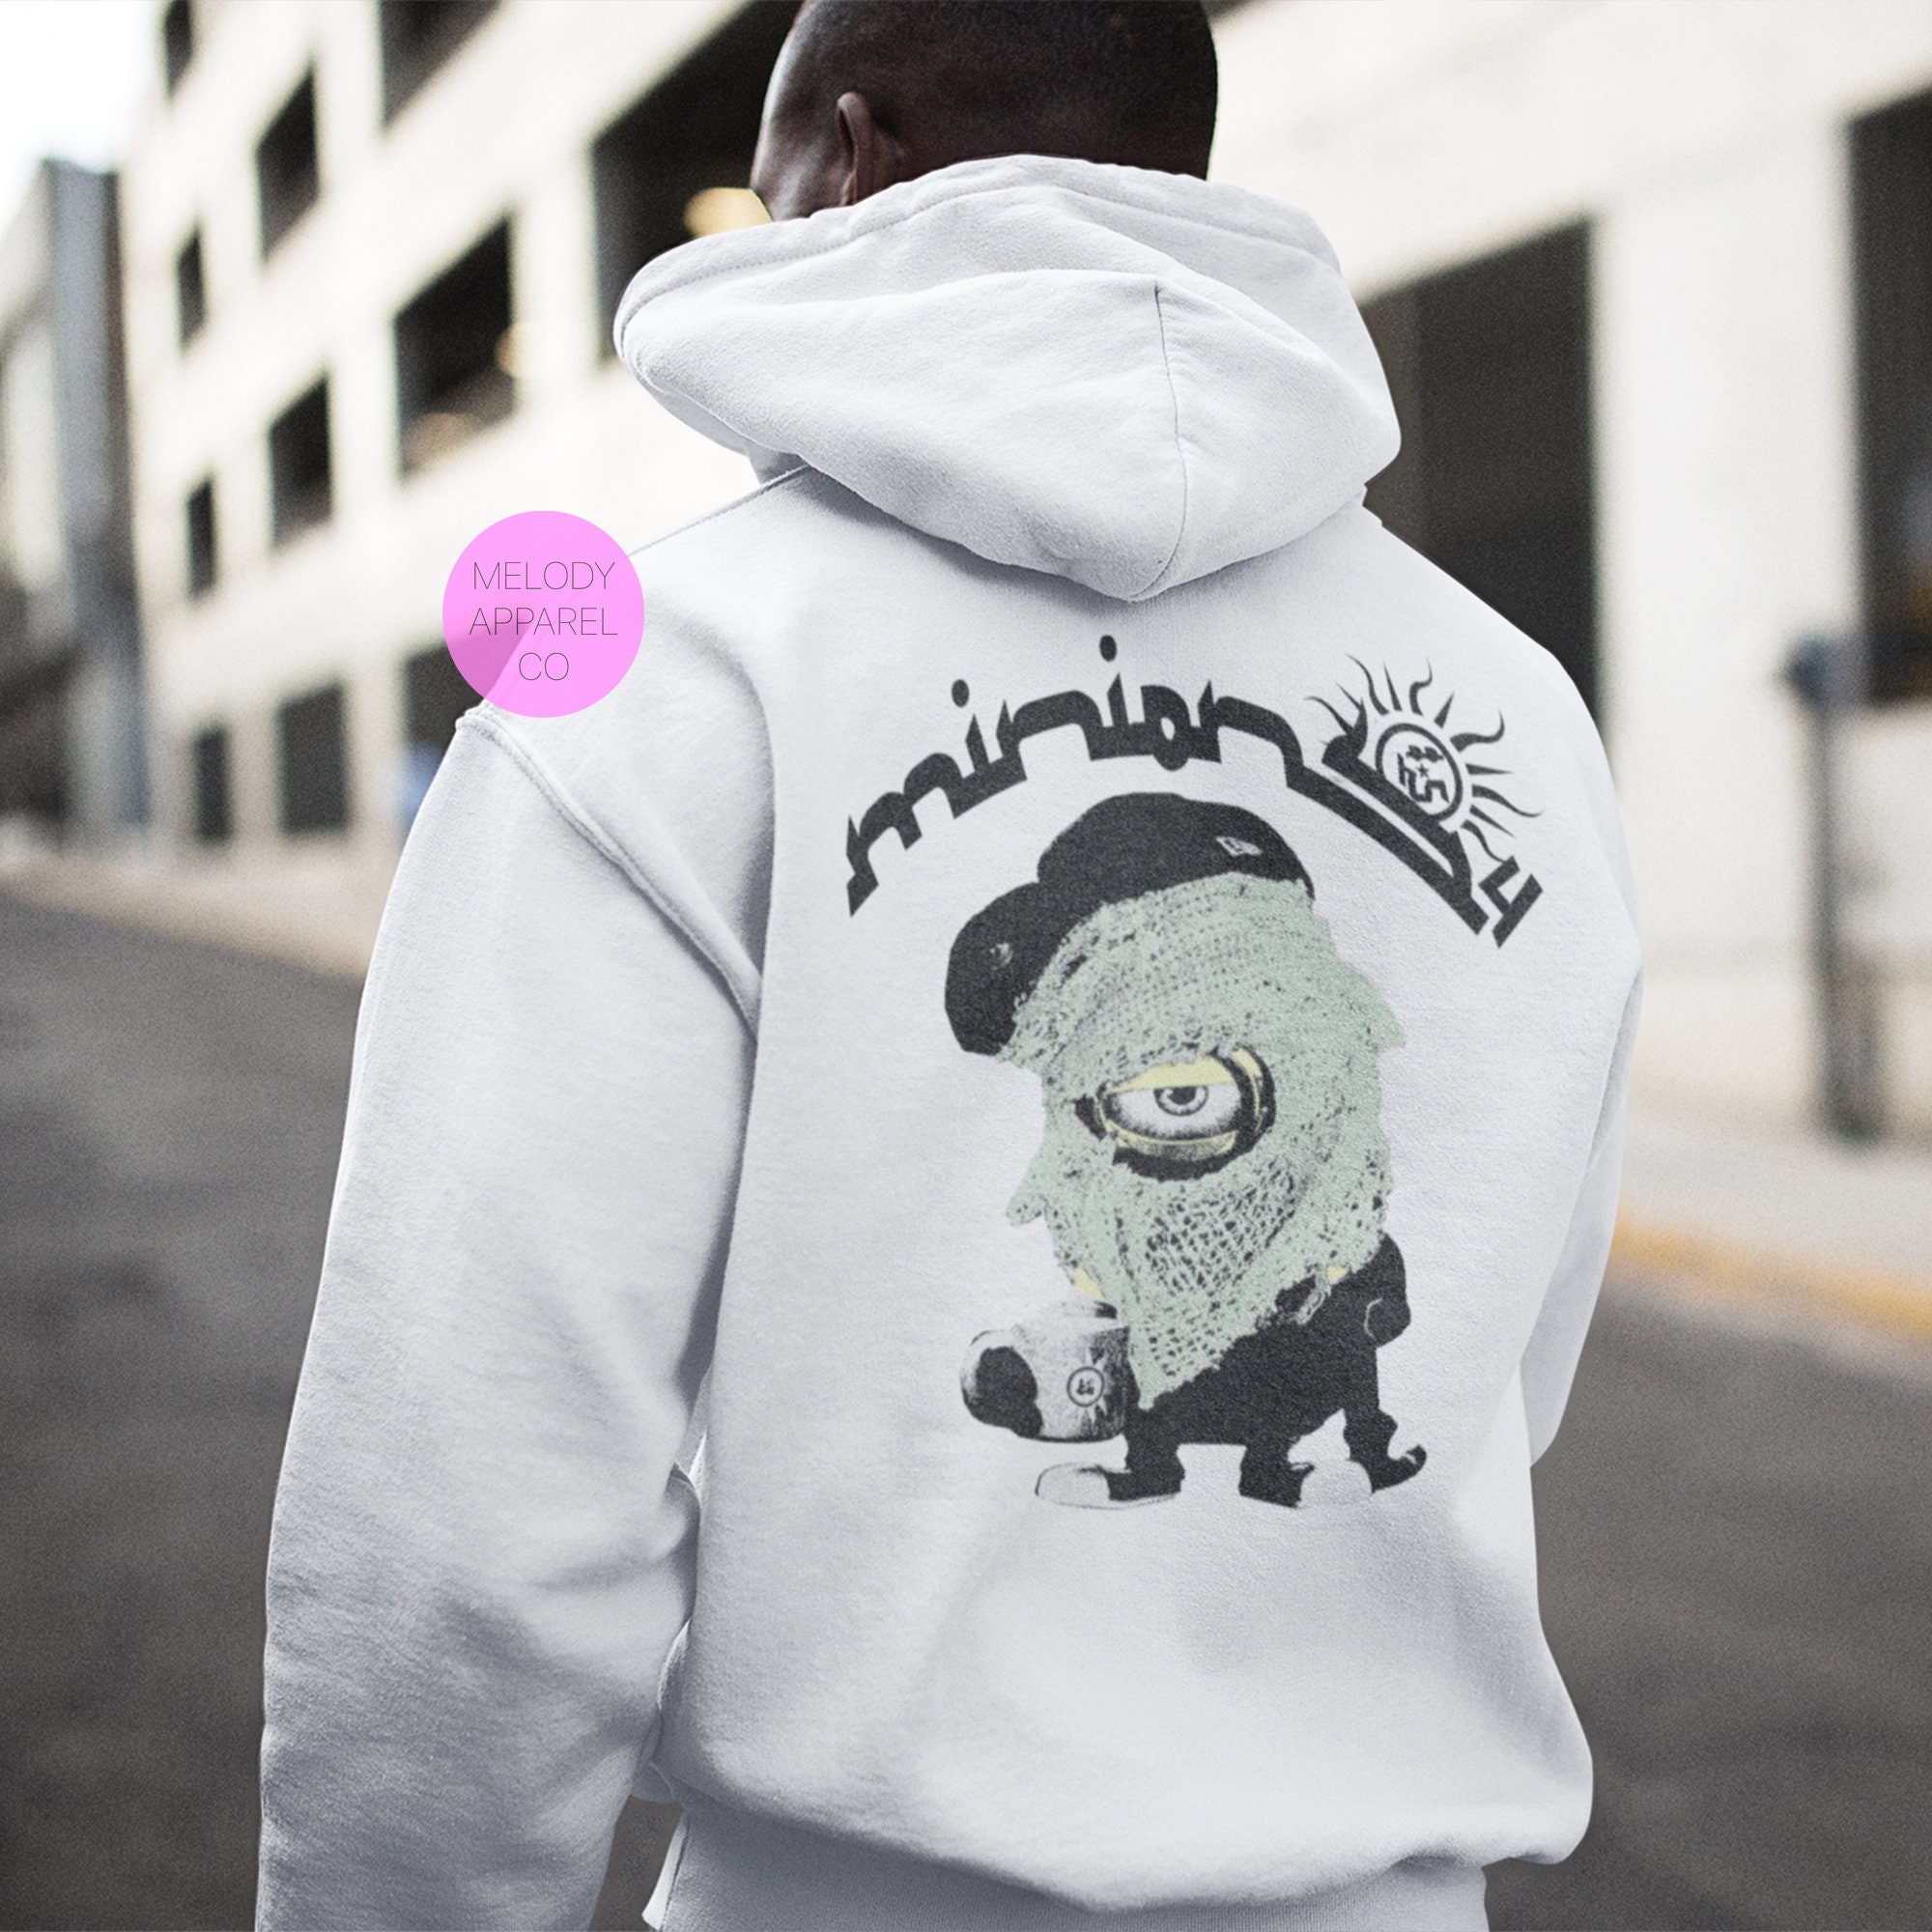 xL ☆ wasted youth x minions hoodie